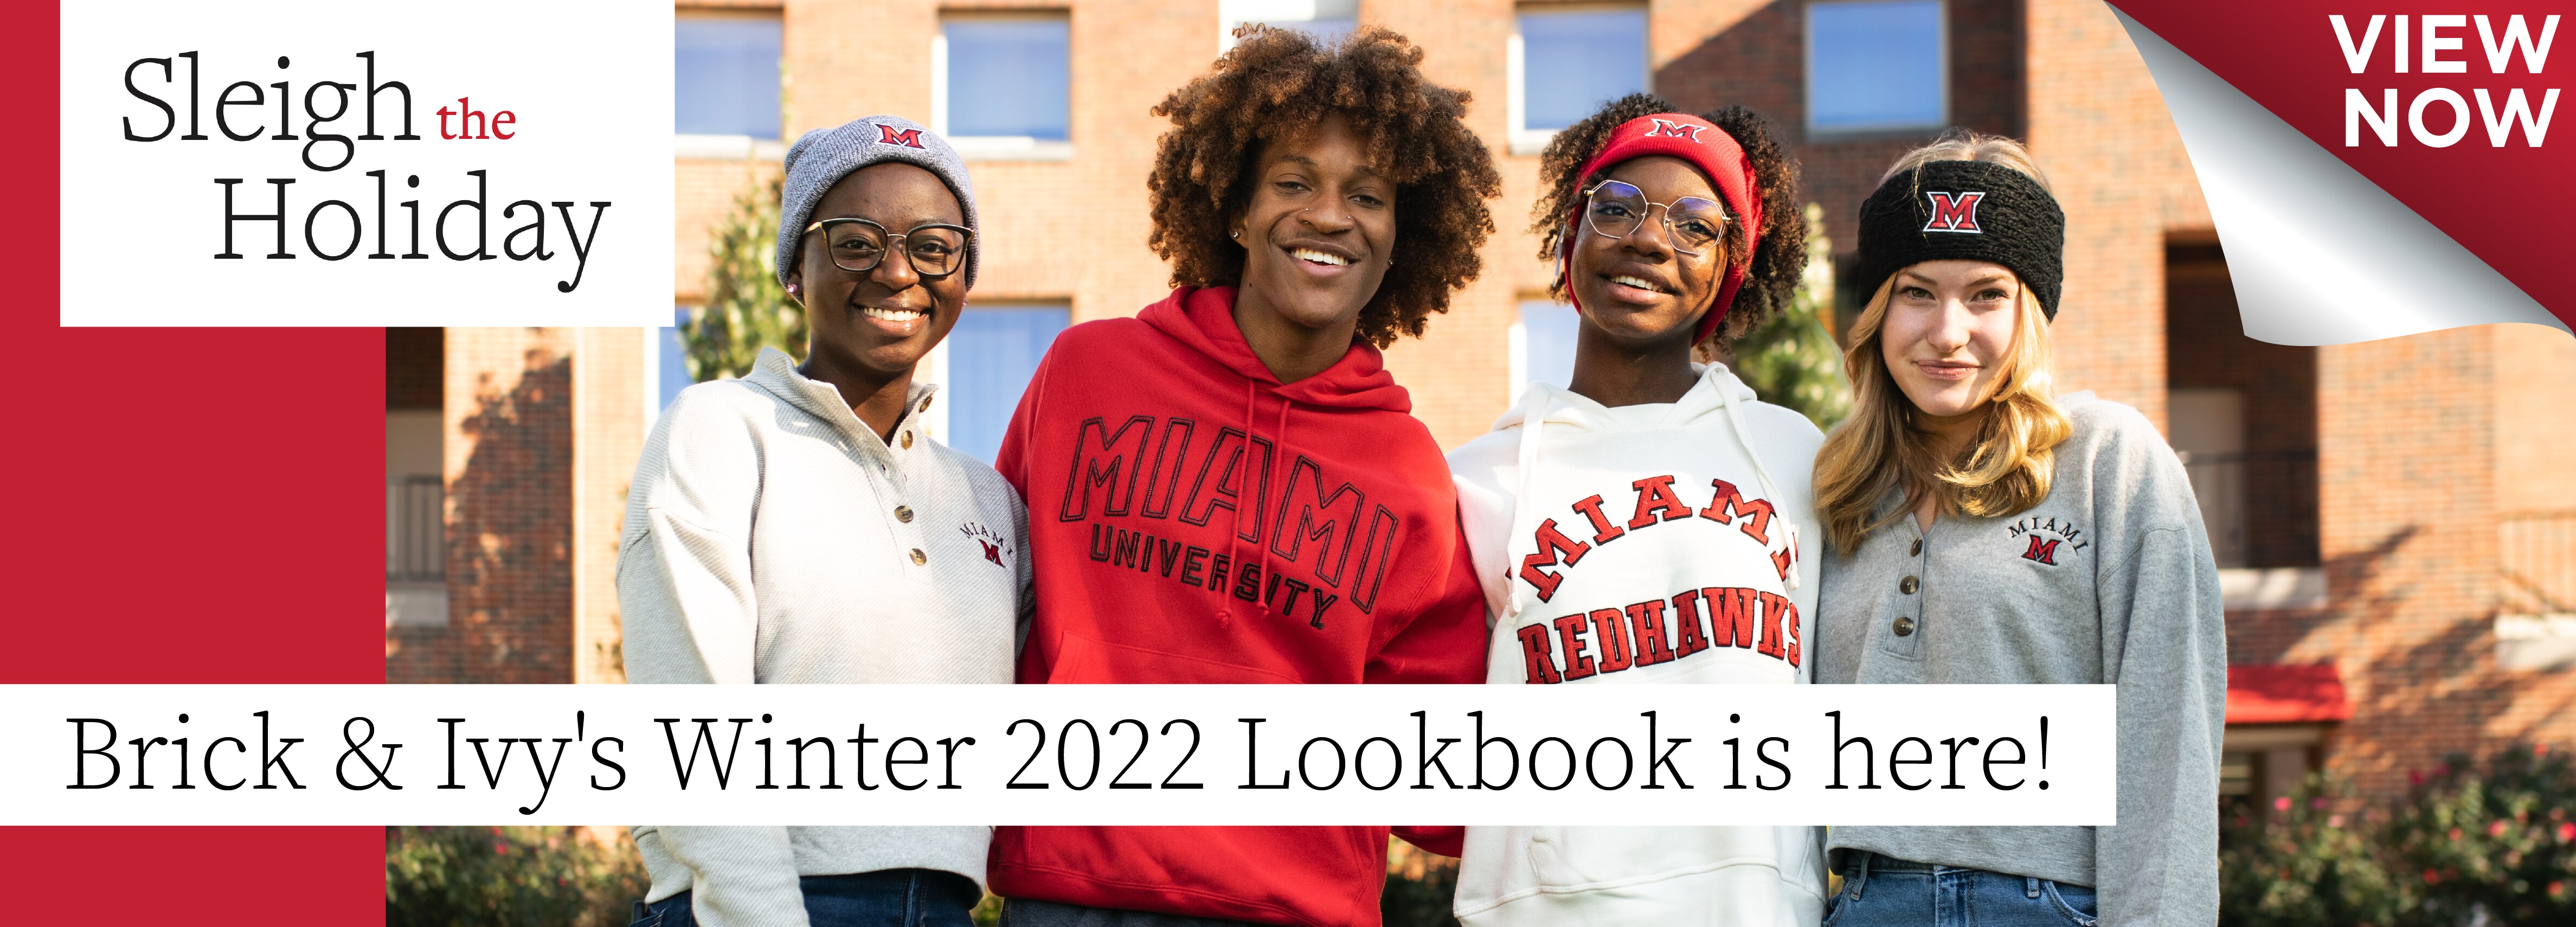 Sleigh the Holiday. Brick and Ivy's Winter 2022 Lookbook is here! View Now. (new tab)